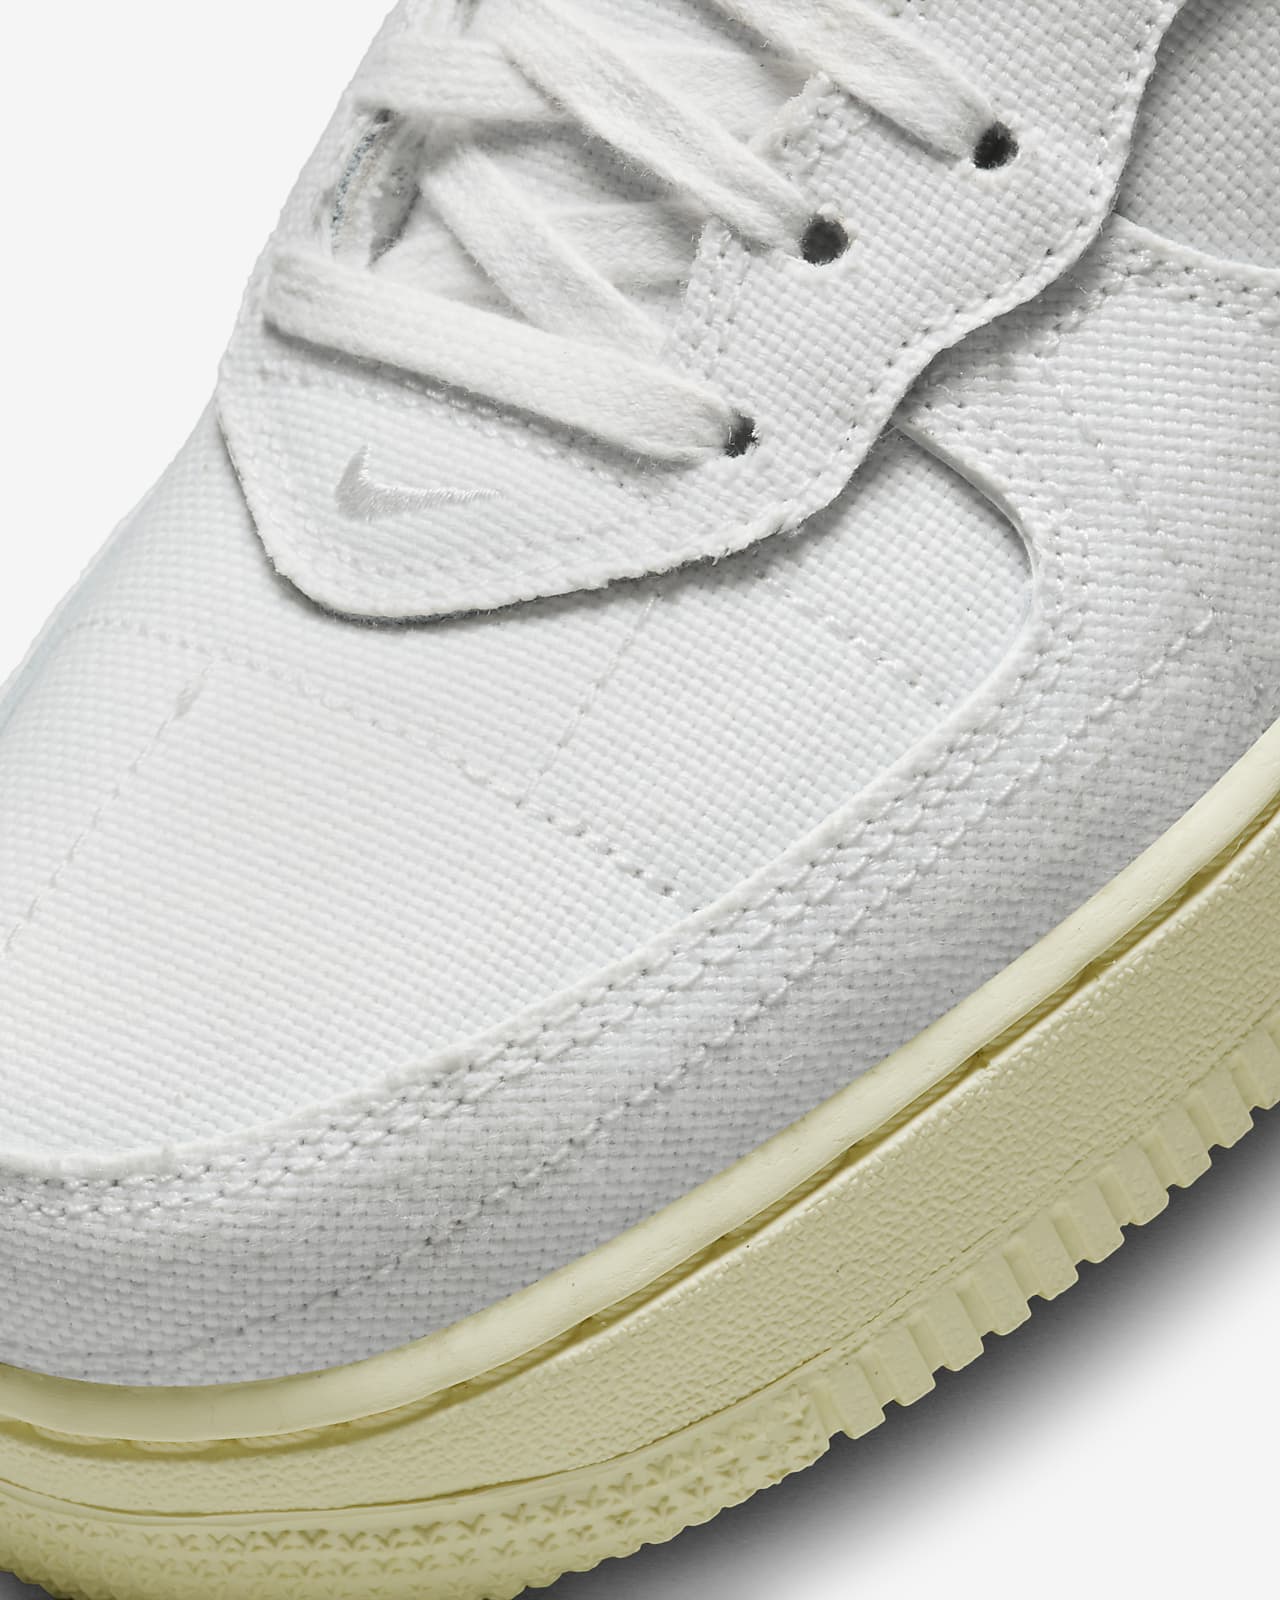 Nike Air Force 1 Air Force 1 '07 LX Release Date, Info, Price